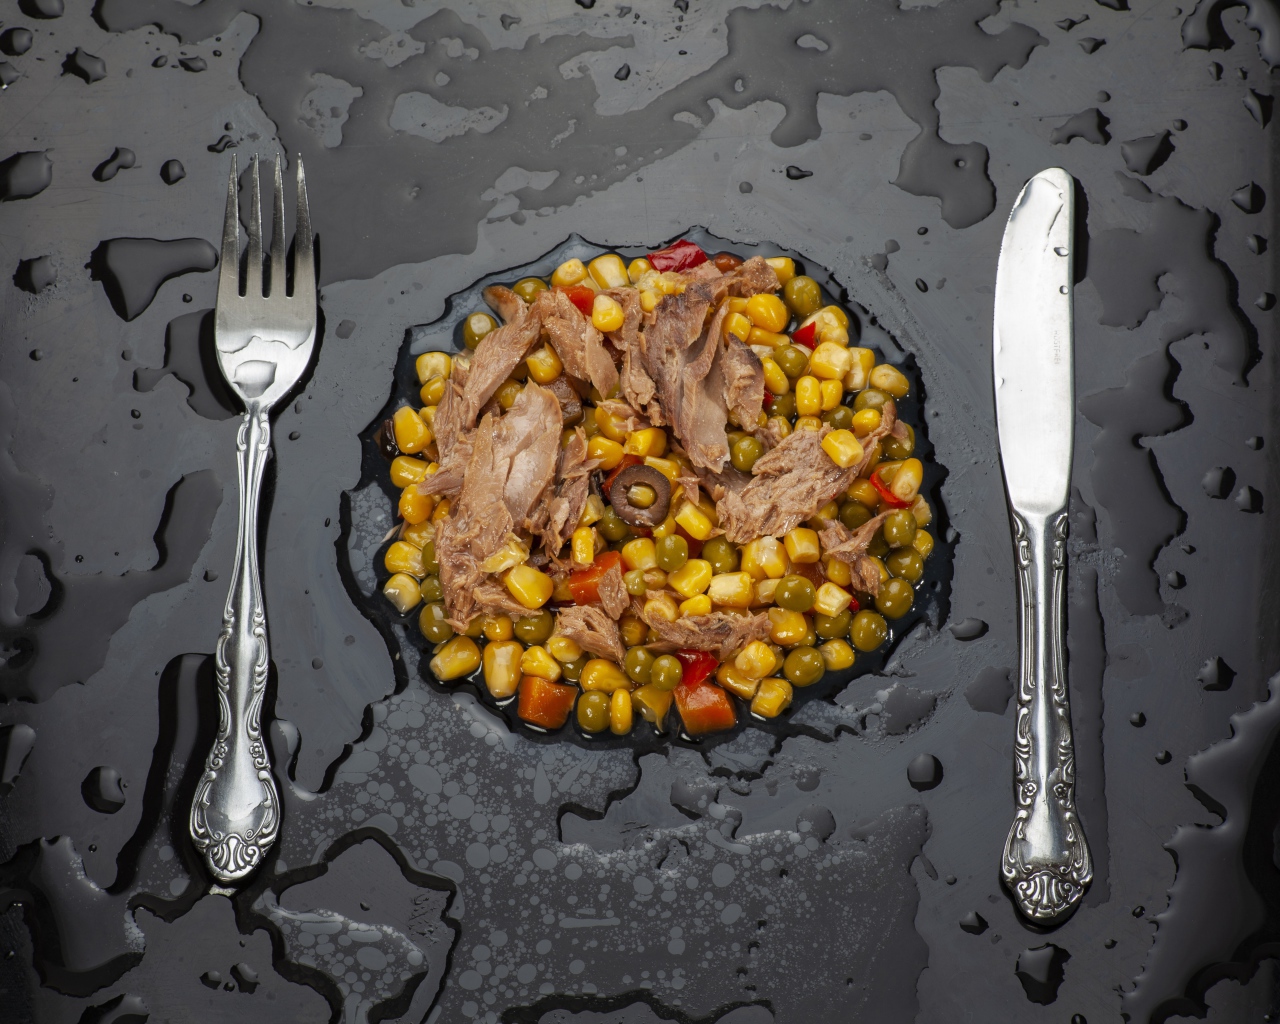 Vegetables with meat and cutlery on a black surface